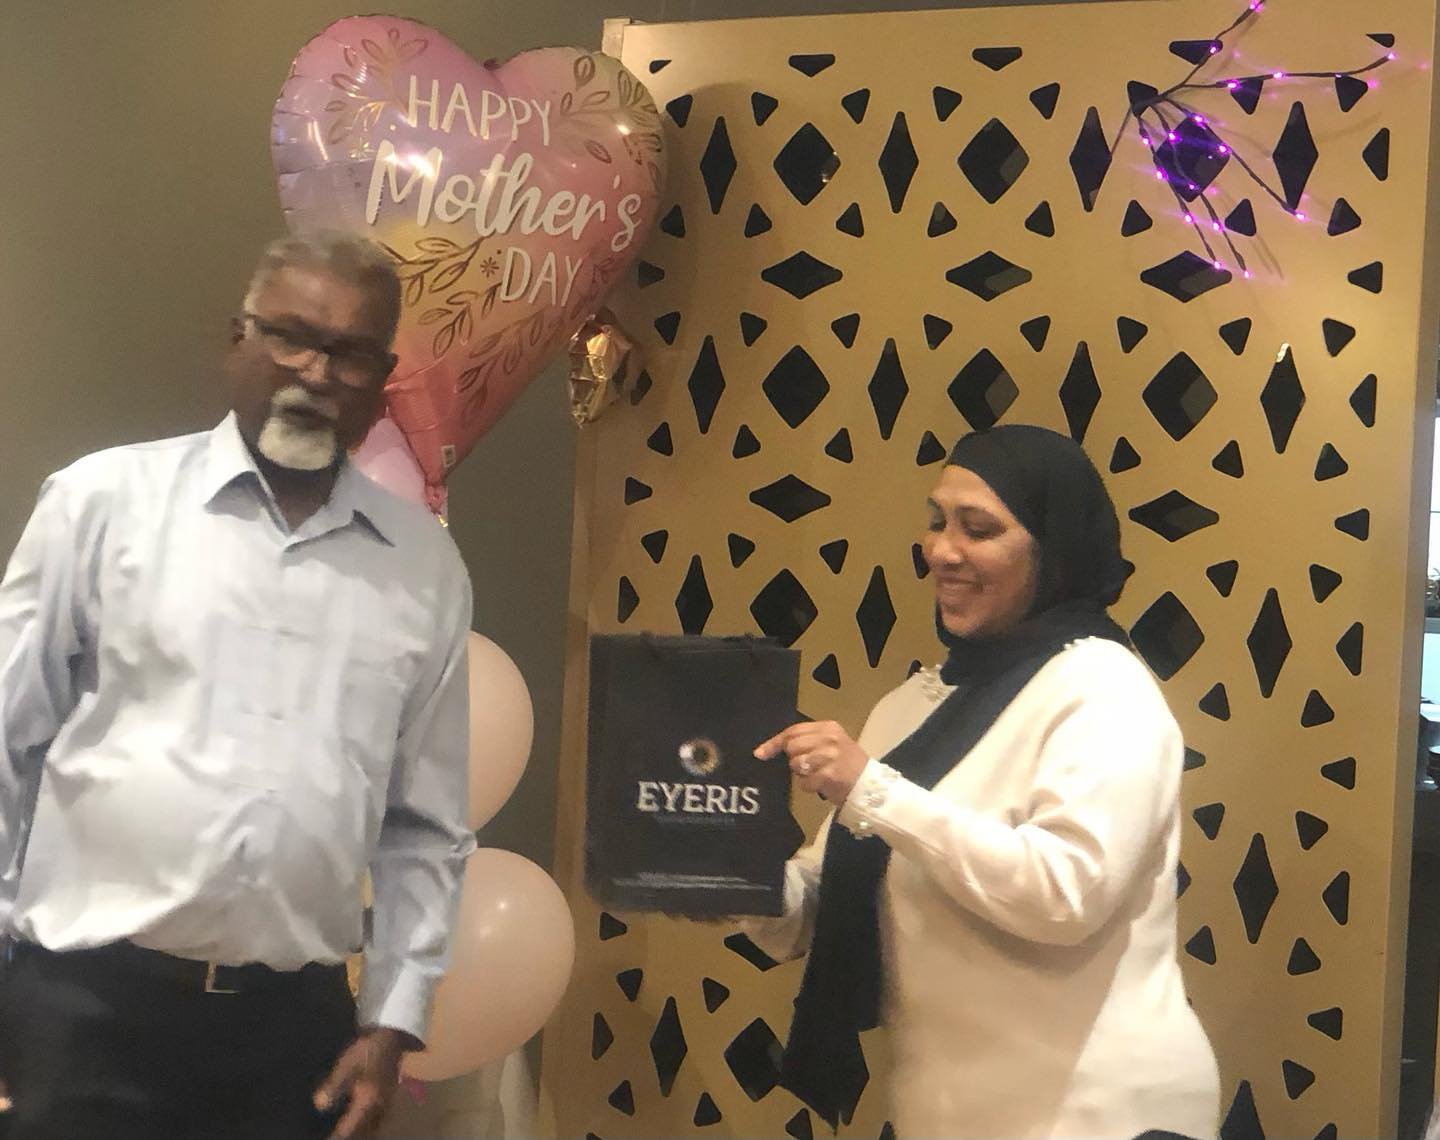 Congratulations to Dr Samad, the happy winner of Eyeris Optometrist&rsquo;s proudly sponsored Henri Wills Sunglasses presented by Club Viti Canberra&rsquo;s President at the amazing Mother&rsquo;s Day Dinner yesterday! 
Thanks CVC for hosting a lovel